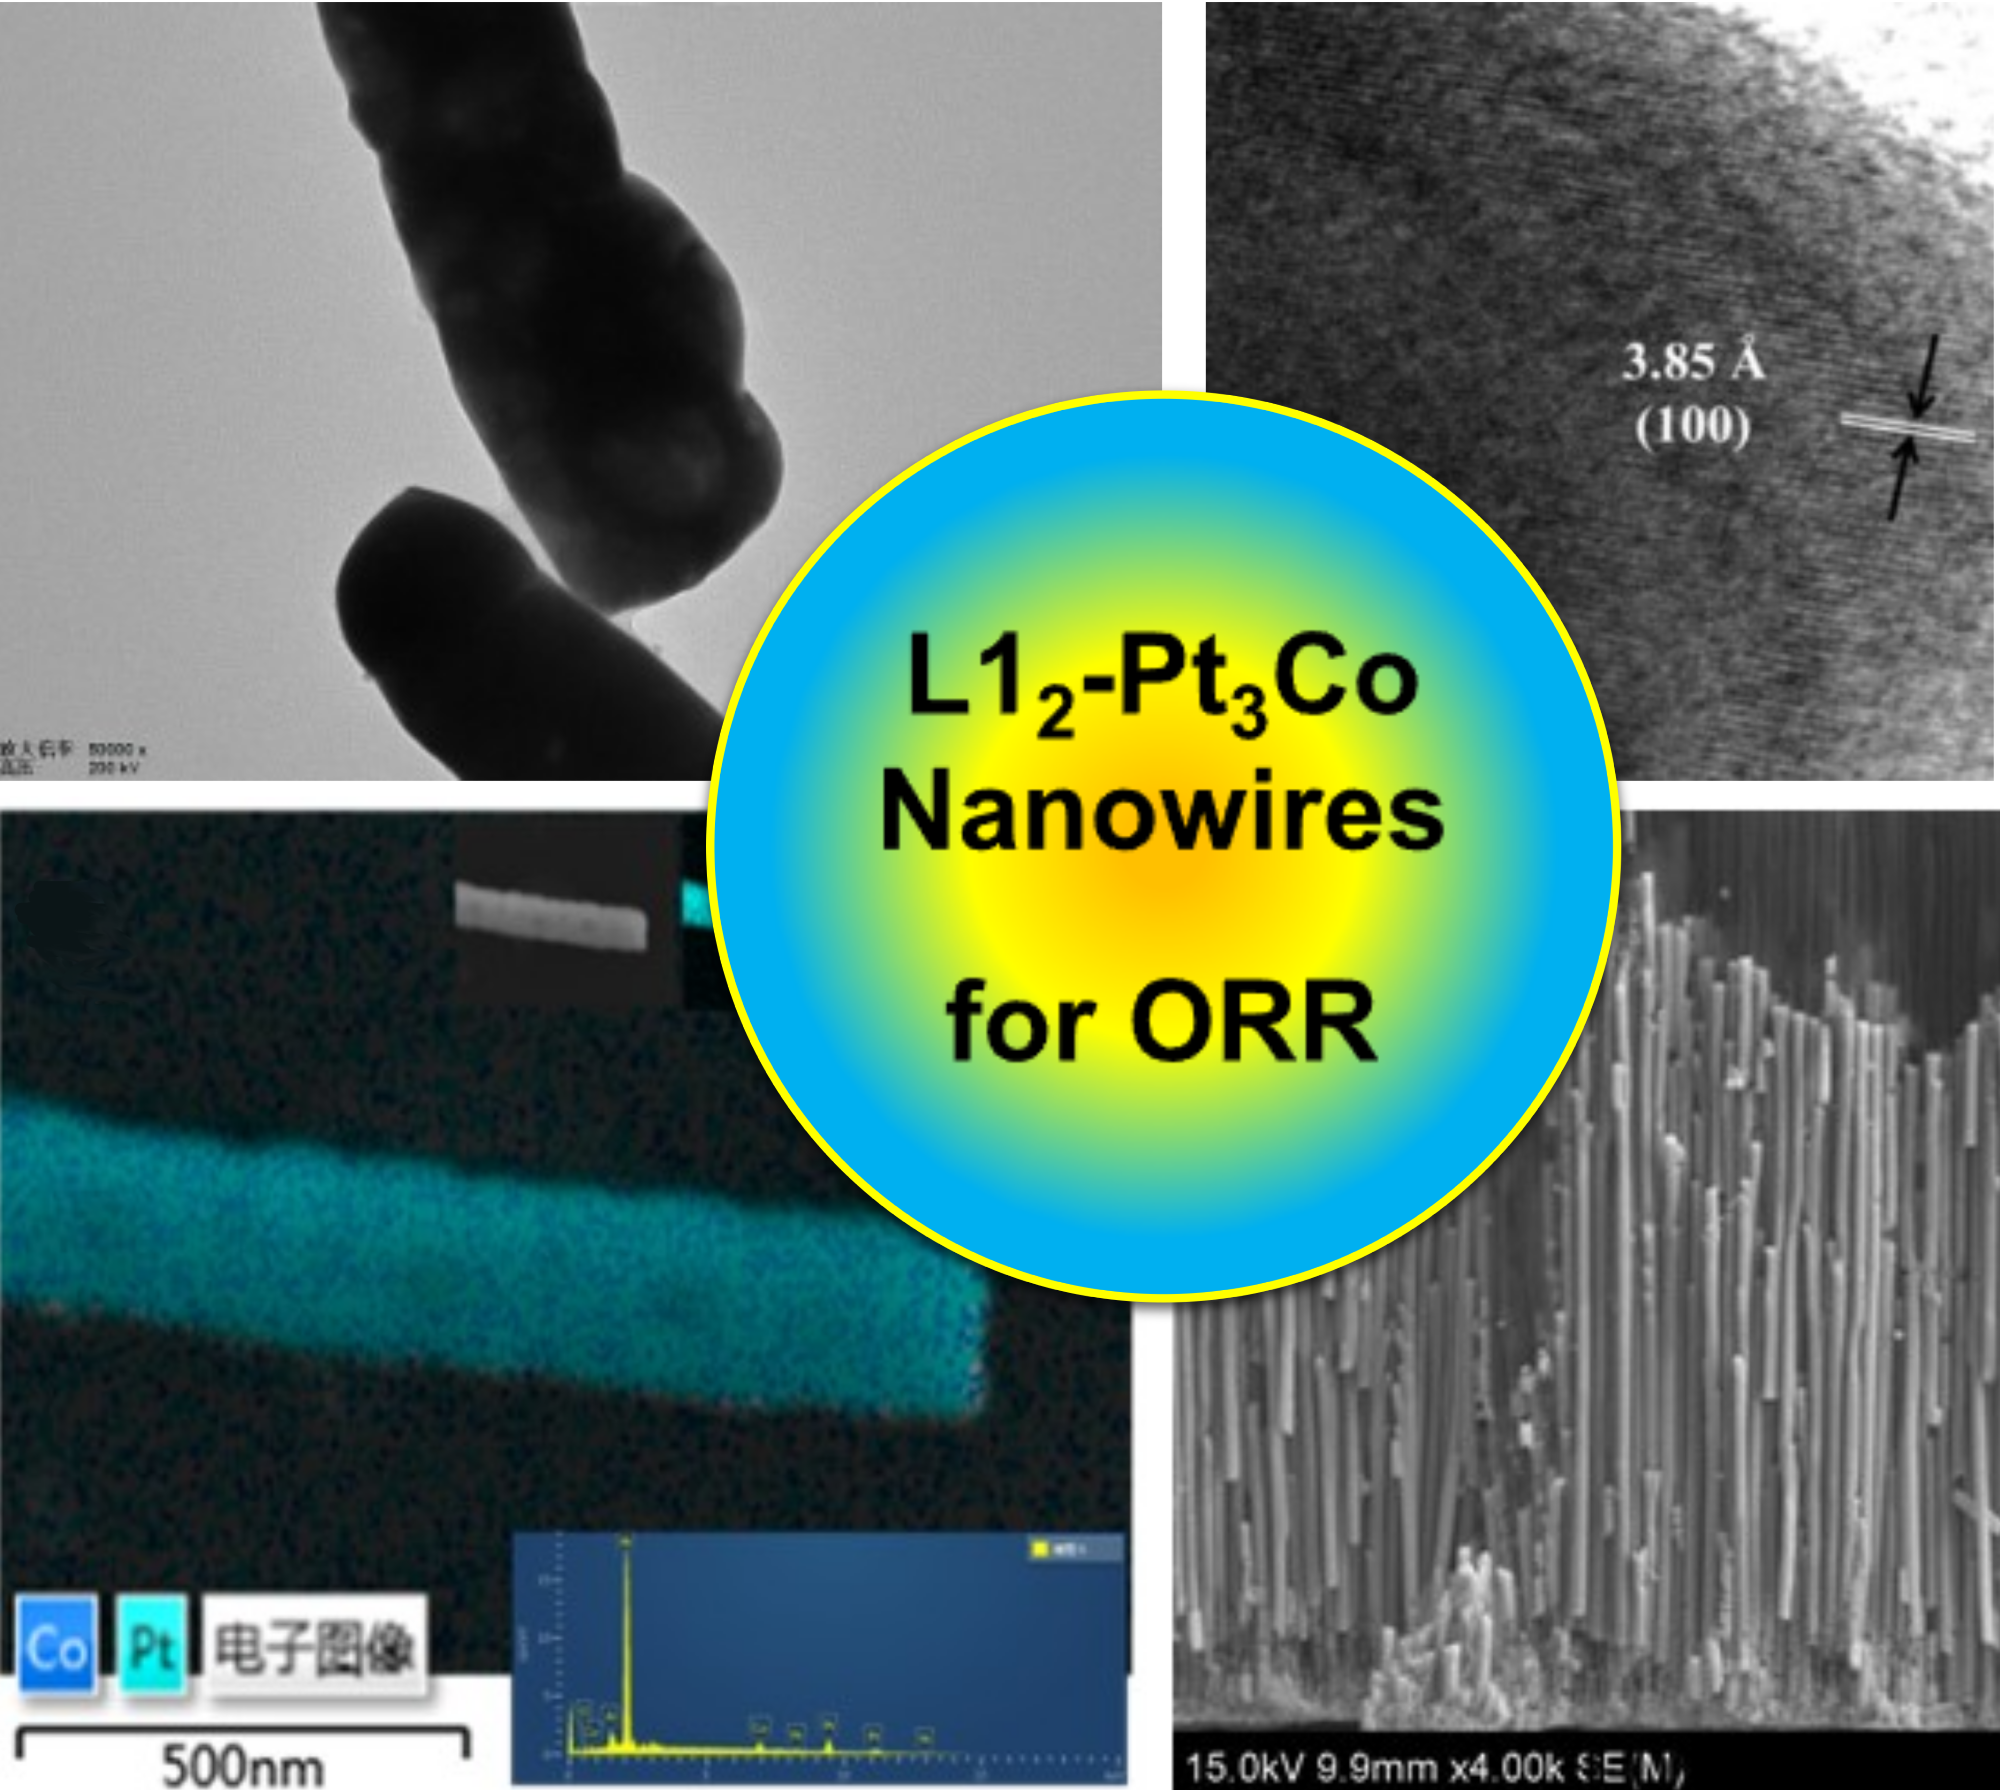 Pt3Co Nanowires: An Efficient and Targeted Oxygen Reduction Process